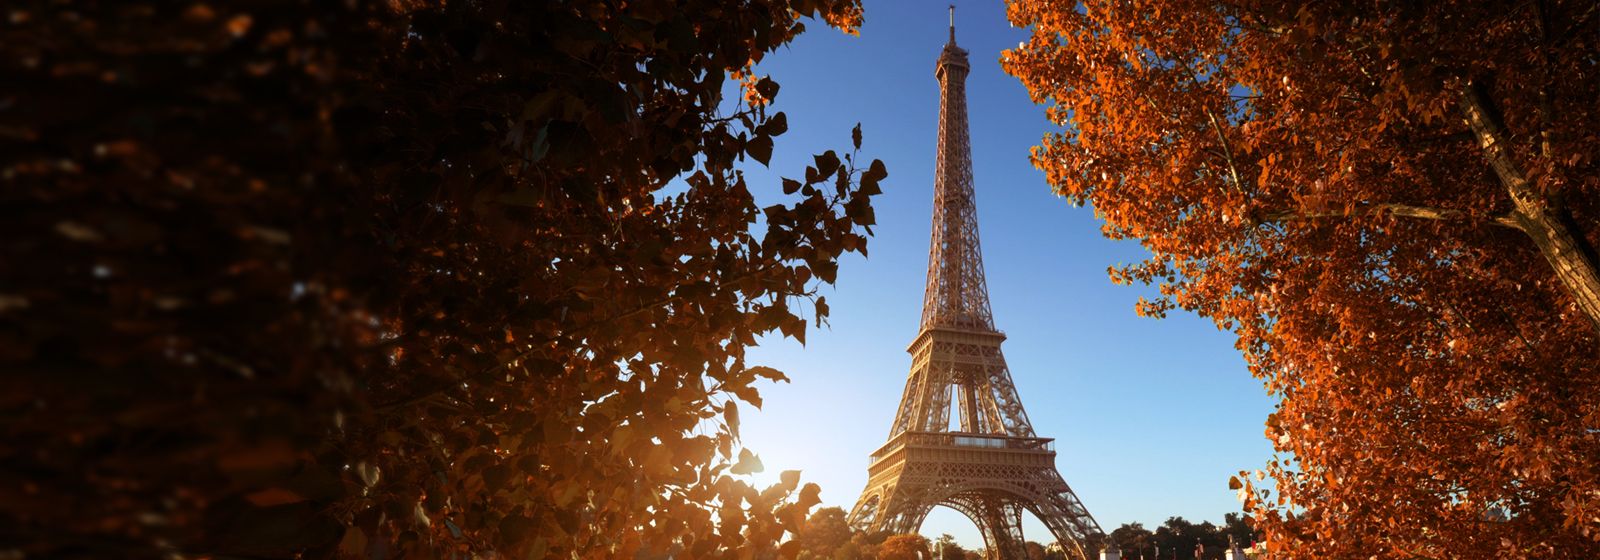 View of the Eiffel Tower through a tree with its leaves in Fall colors